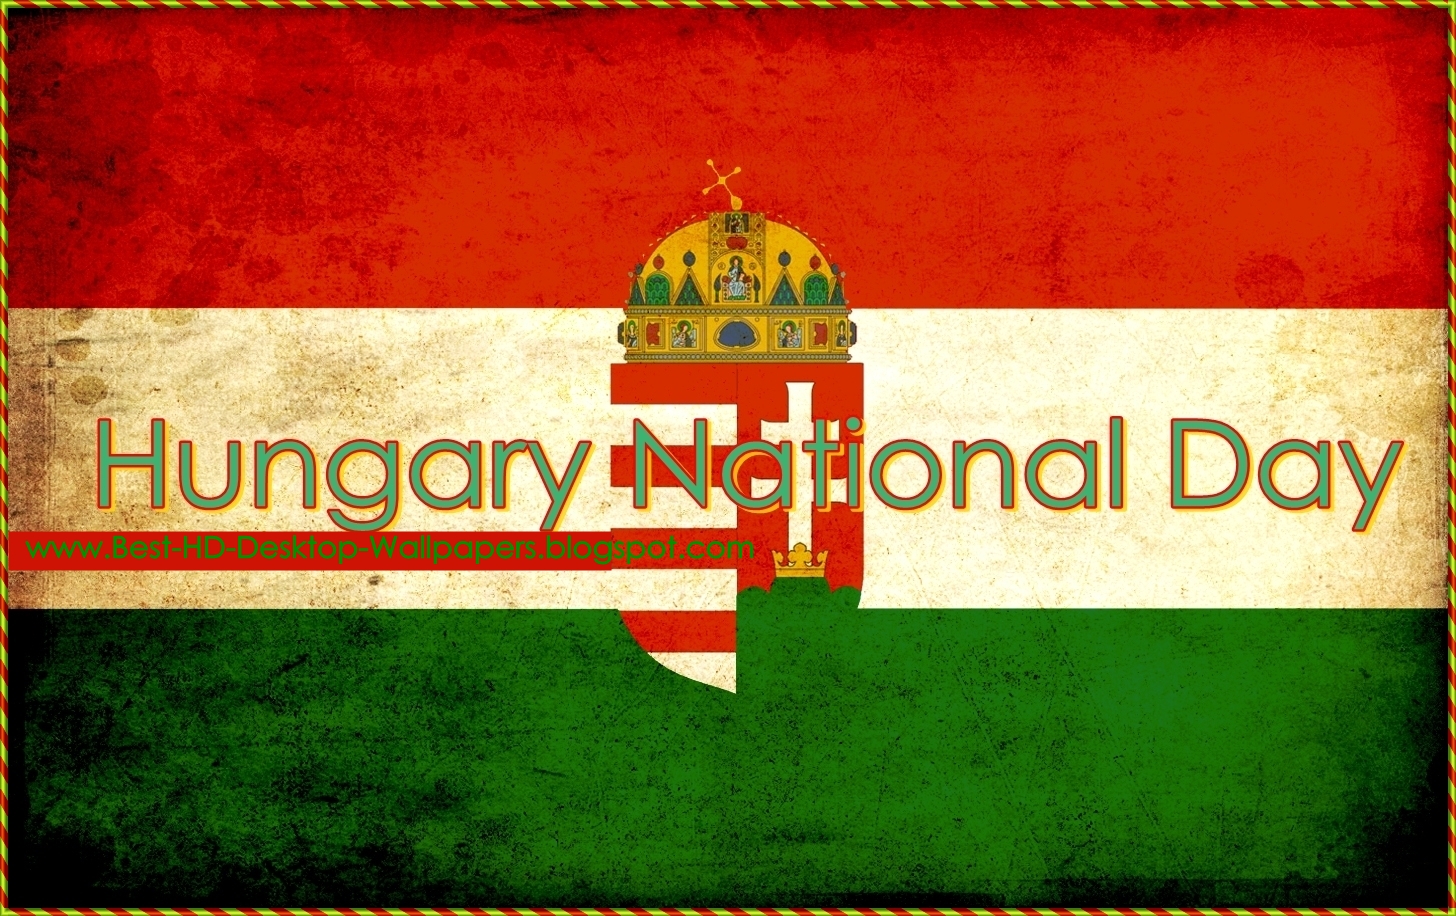 Hungary National Day National Day Wallpaper. Best HD